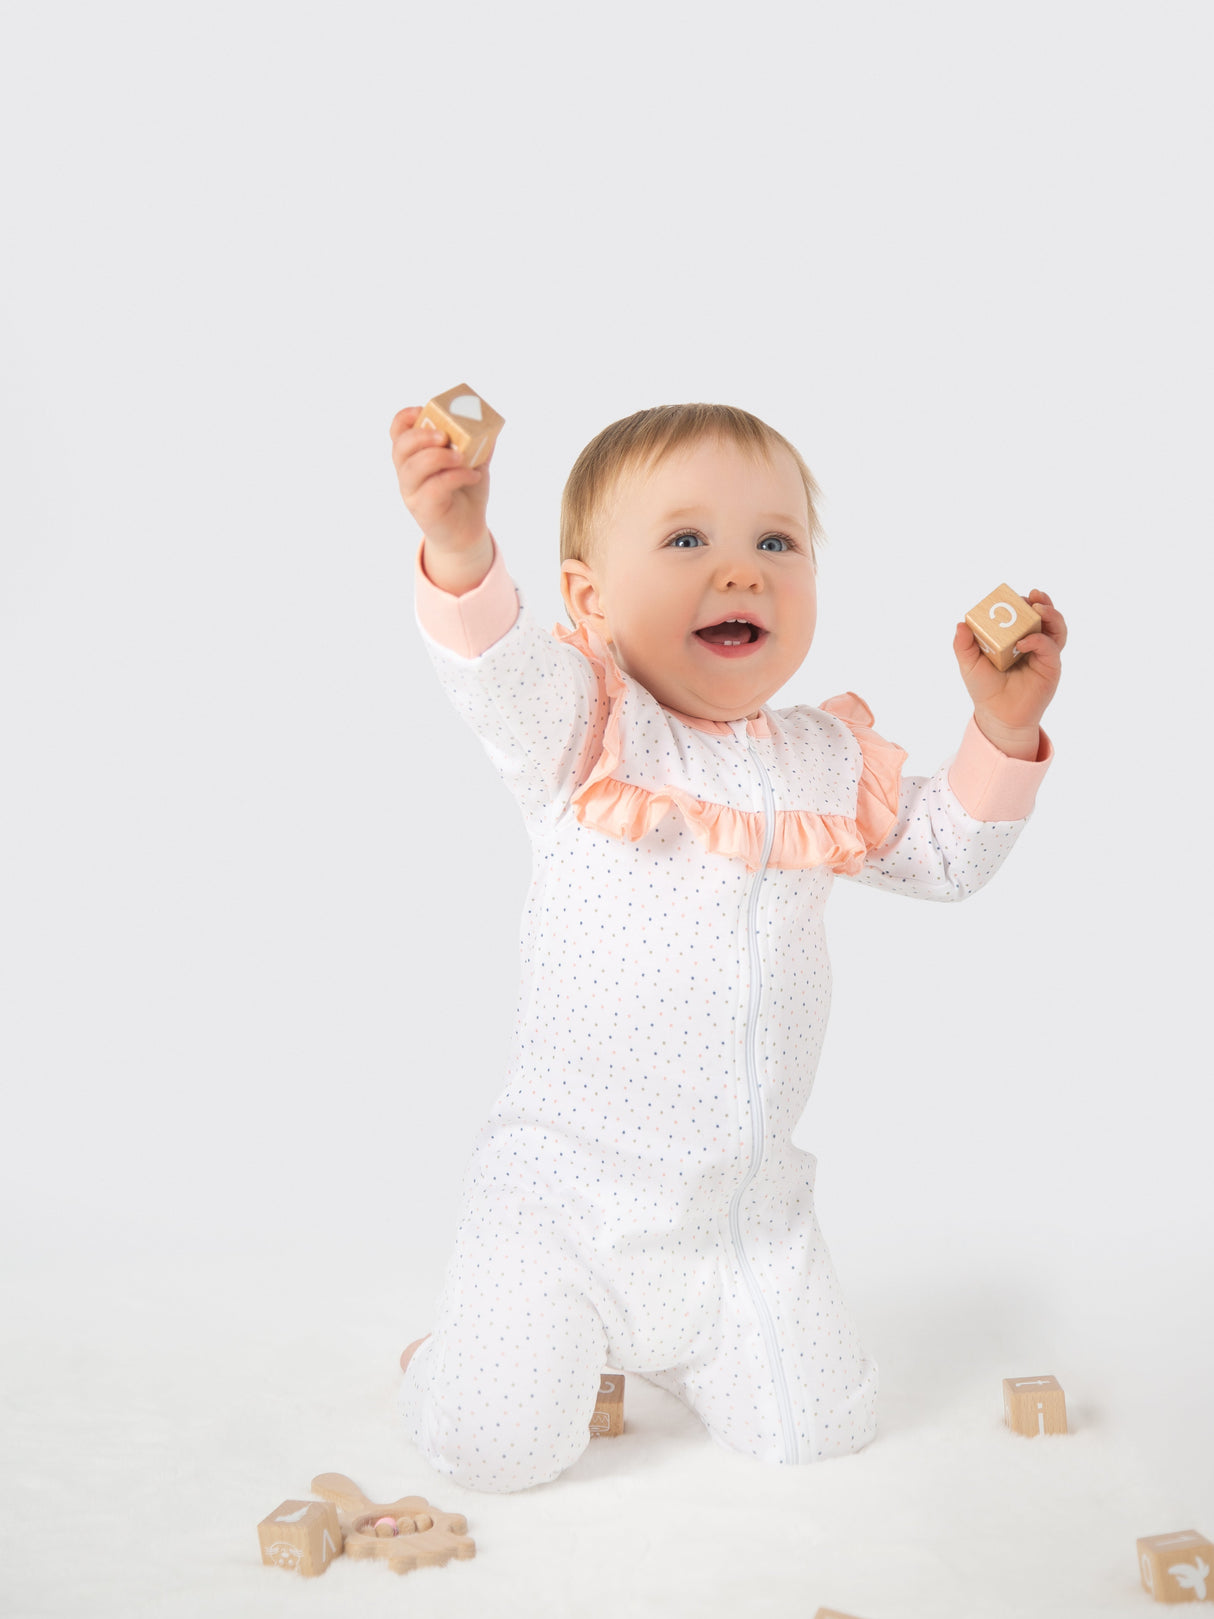 Organic Cotton Ruffled Romper - Pink Polka by Little Moy